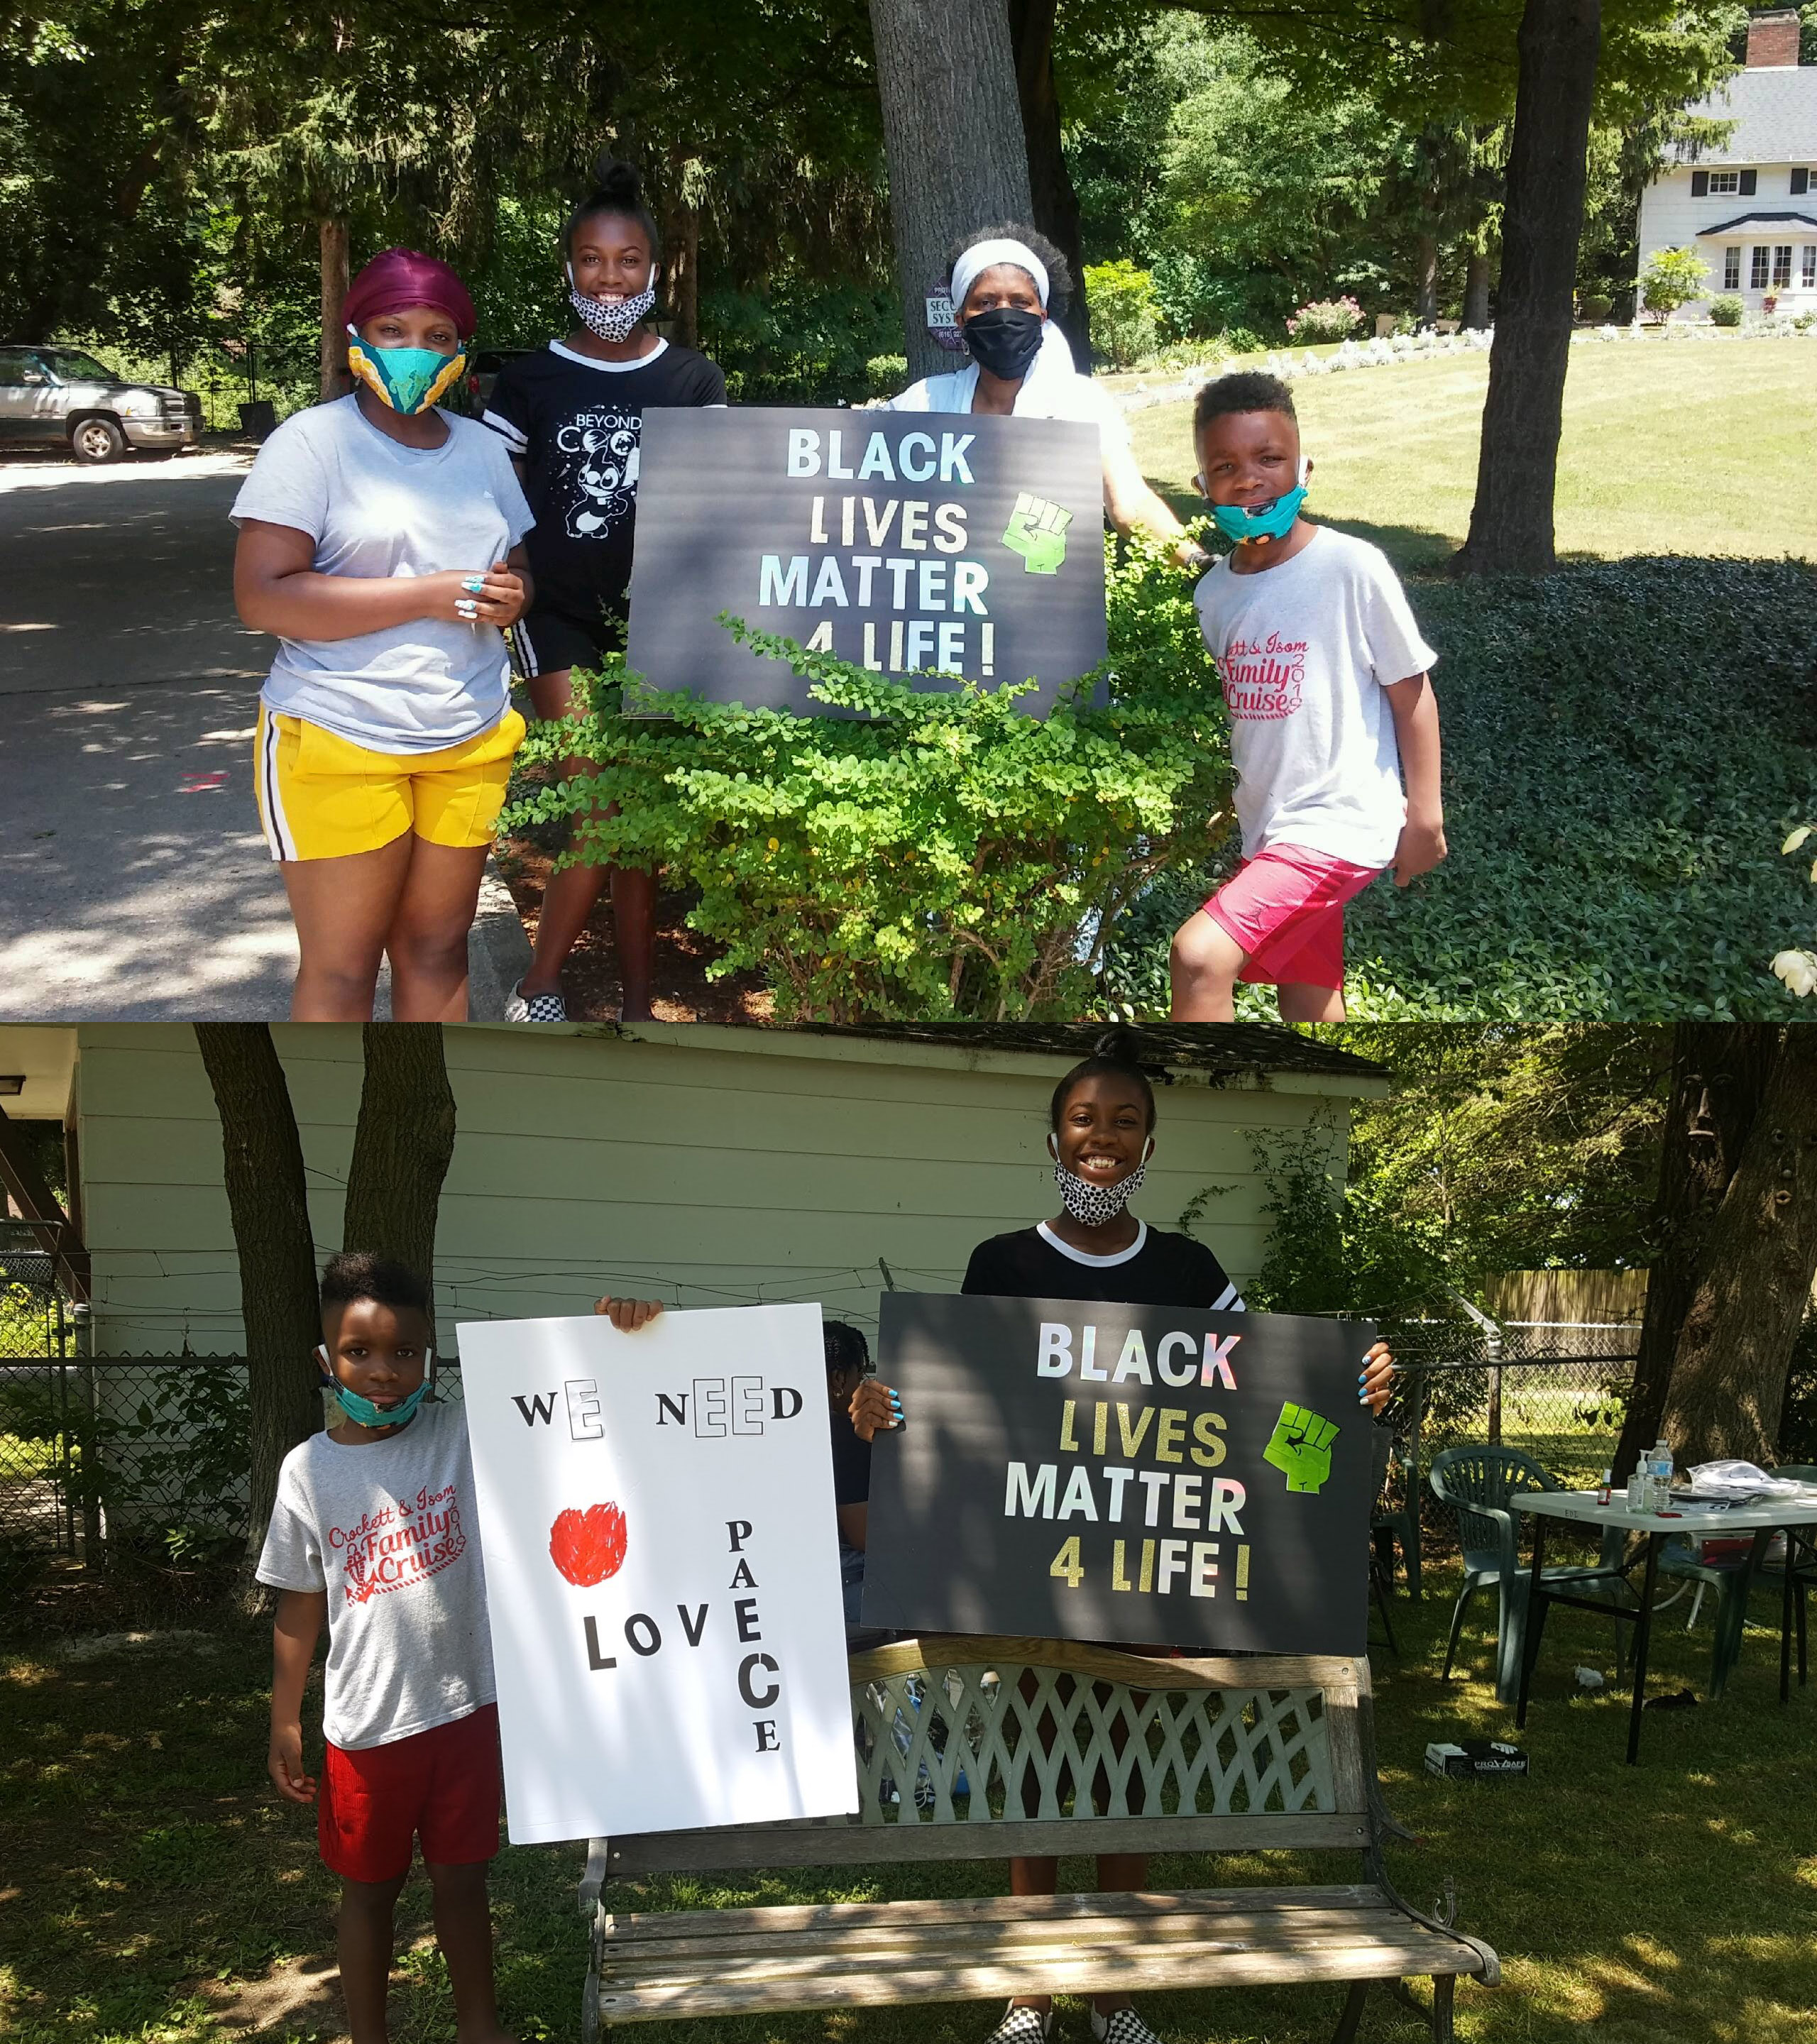 A collage of two images with children holding posterboard signs: Black lives matter 4 life! and We need love and peace.